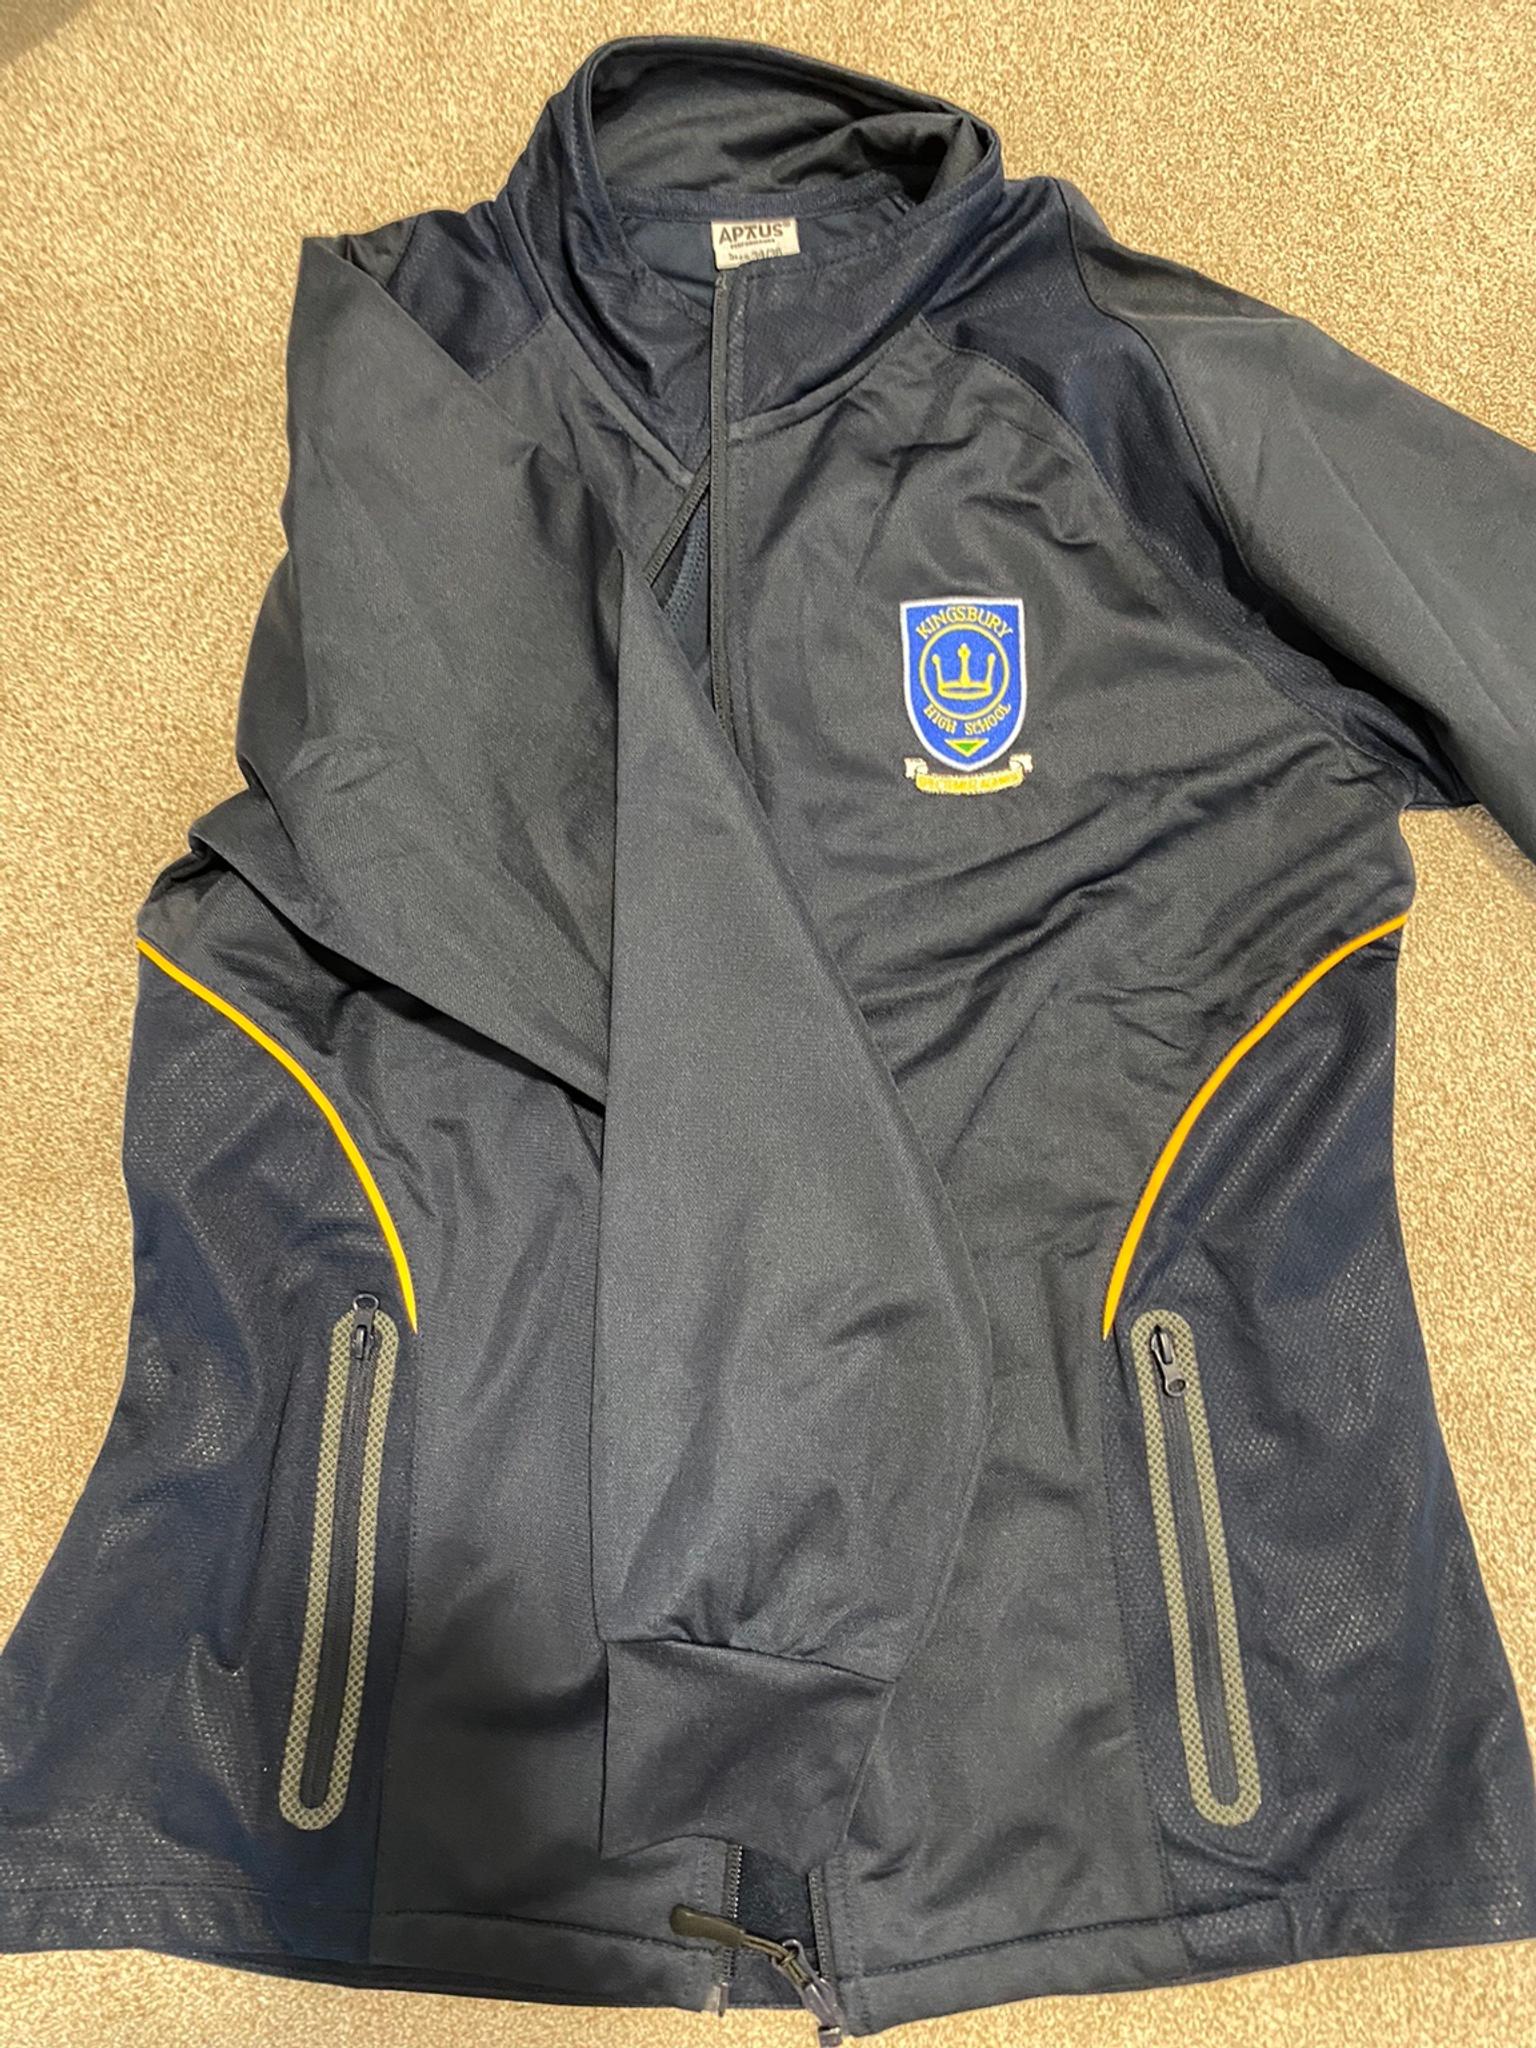 KINGSBURY HIGH SCHOOL PE UNIFORMS in NW9 London for £34.00 for sale ...